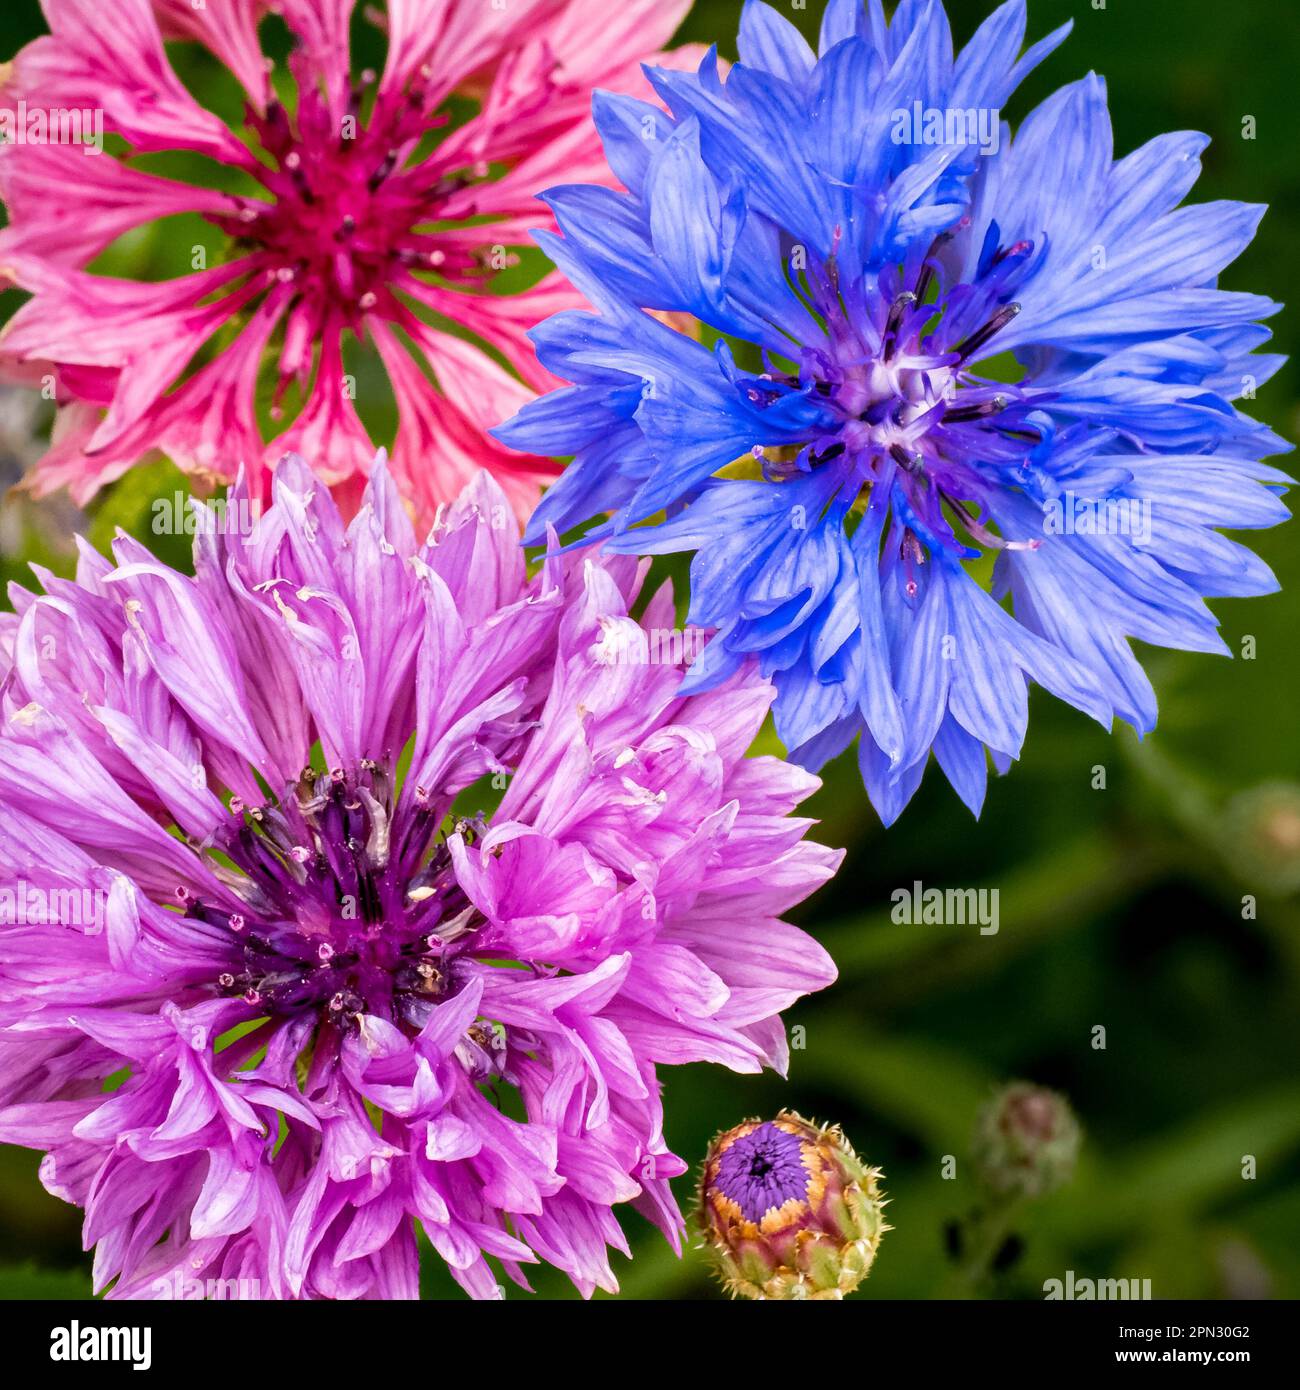 Three Centaurea Cyanus cornflowers, each with their intense hues of blue, pink and purple make for a stunning display of natures colorful beauty. Stock Photo